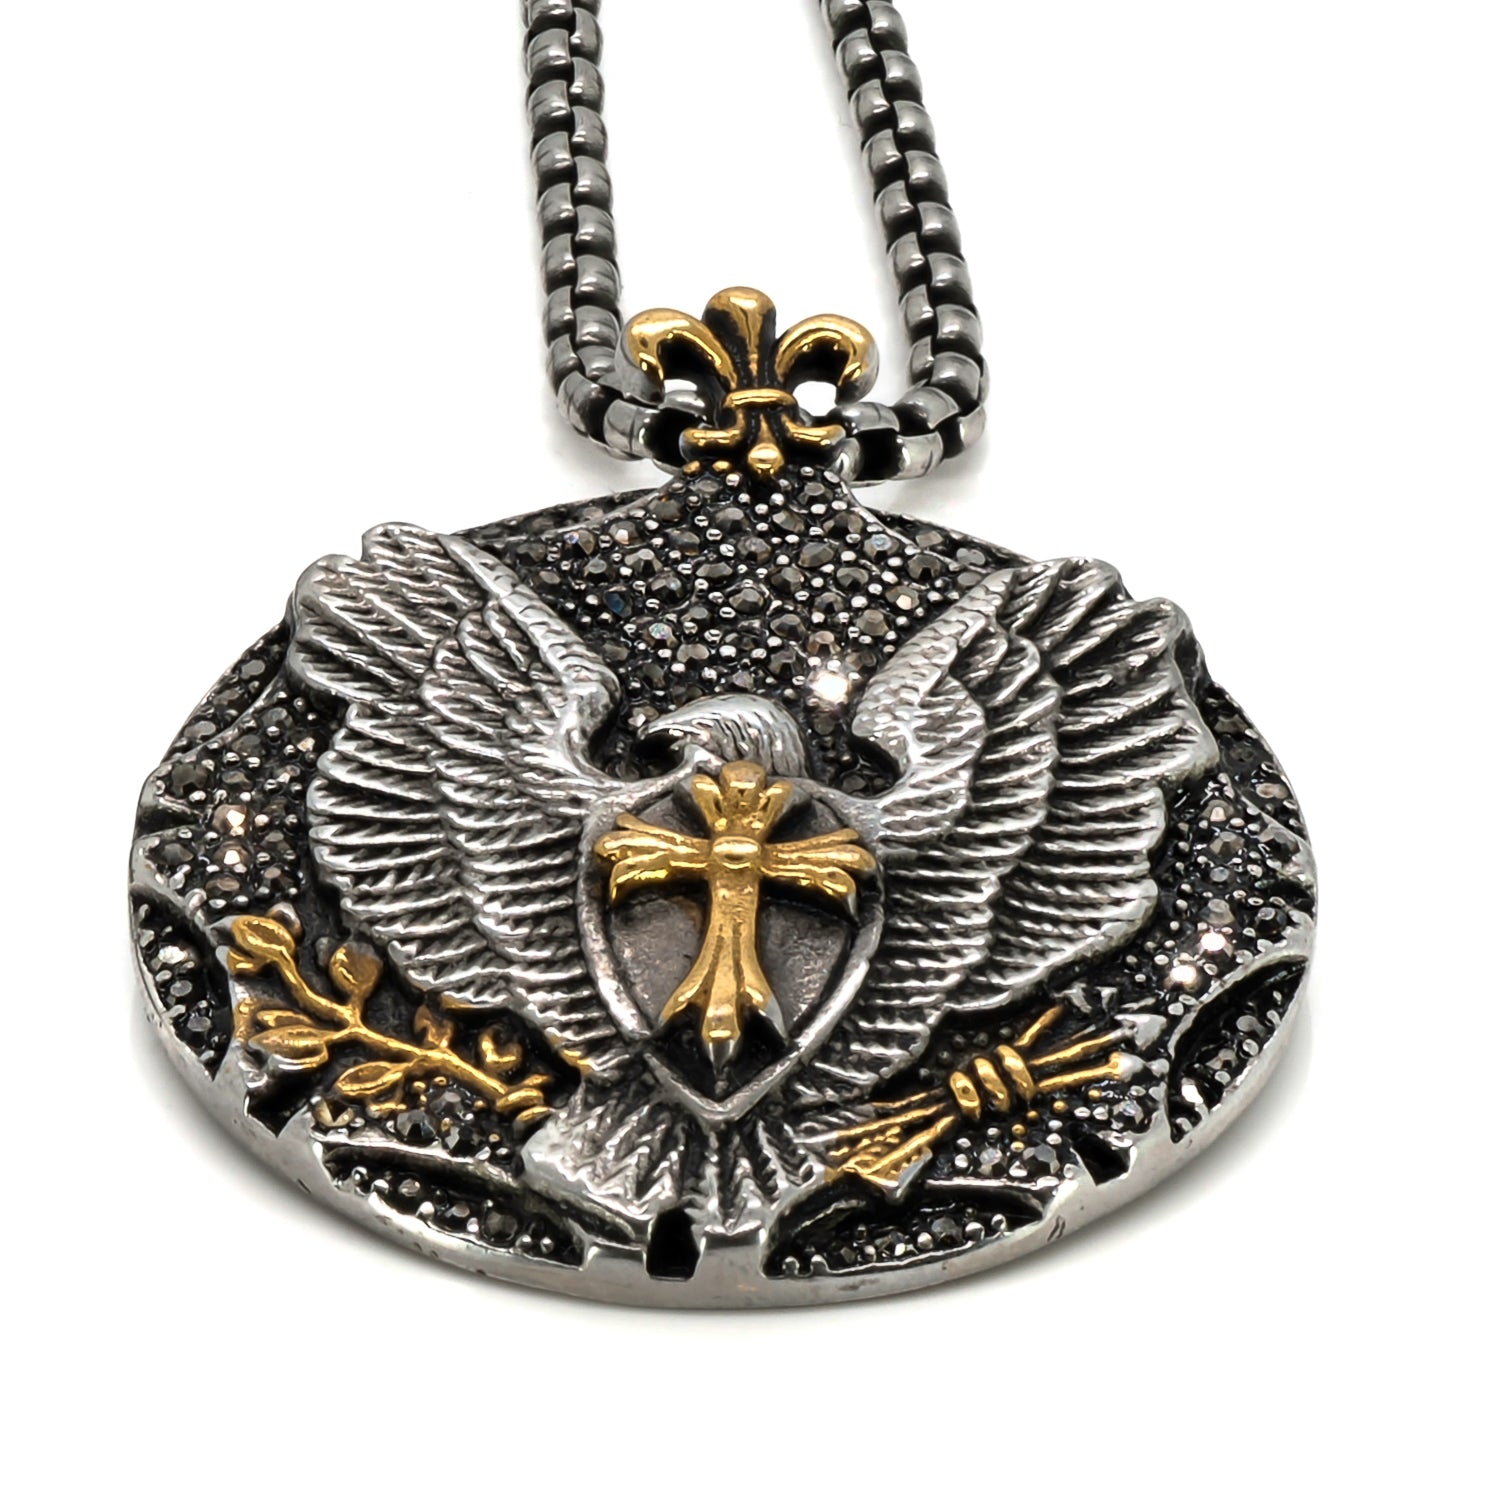 Powerful Eagle Spiritual Symbols Silver &amp; Gold Chain Necklace